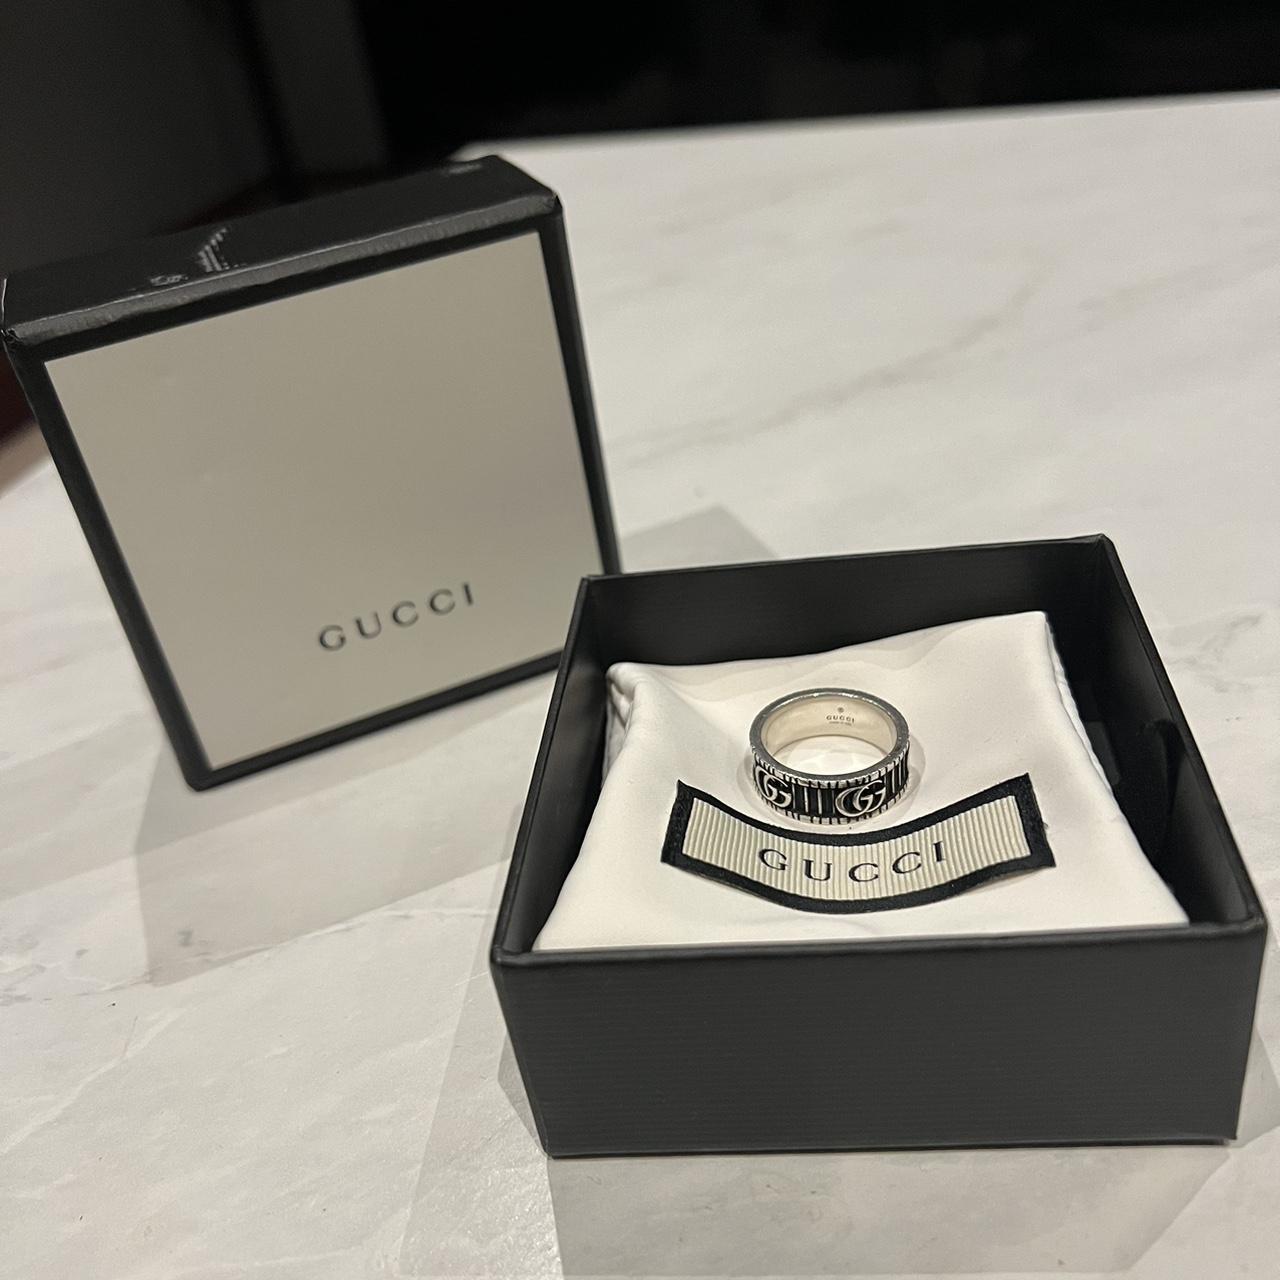 Mens double G Gucci ring in silver - Depop